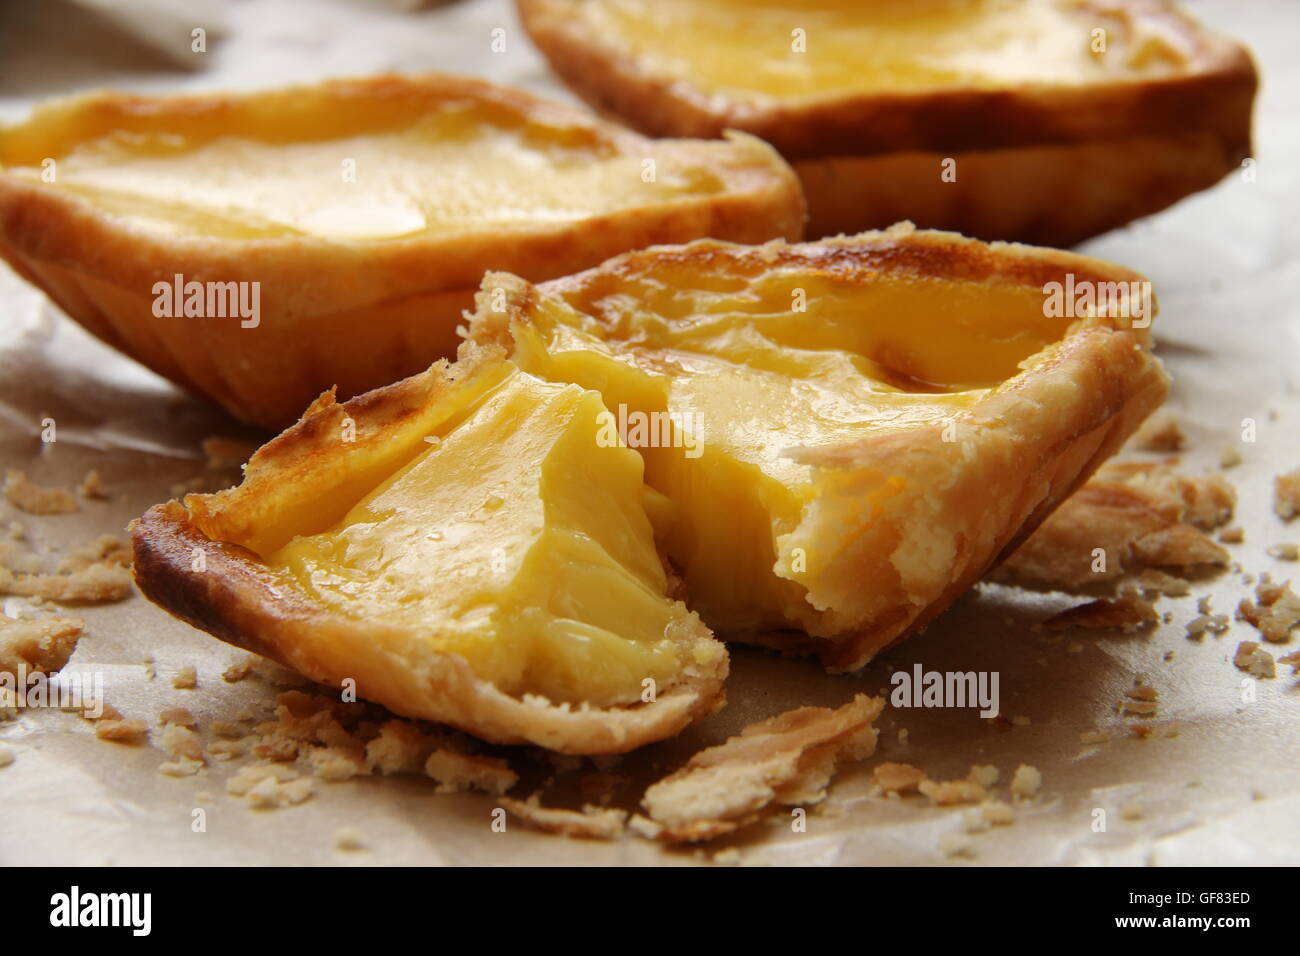 Egg tarts arranged on crumpled food wrapping paper. The crumbs are scattered around the tarts. Stock Photo